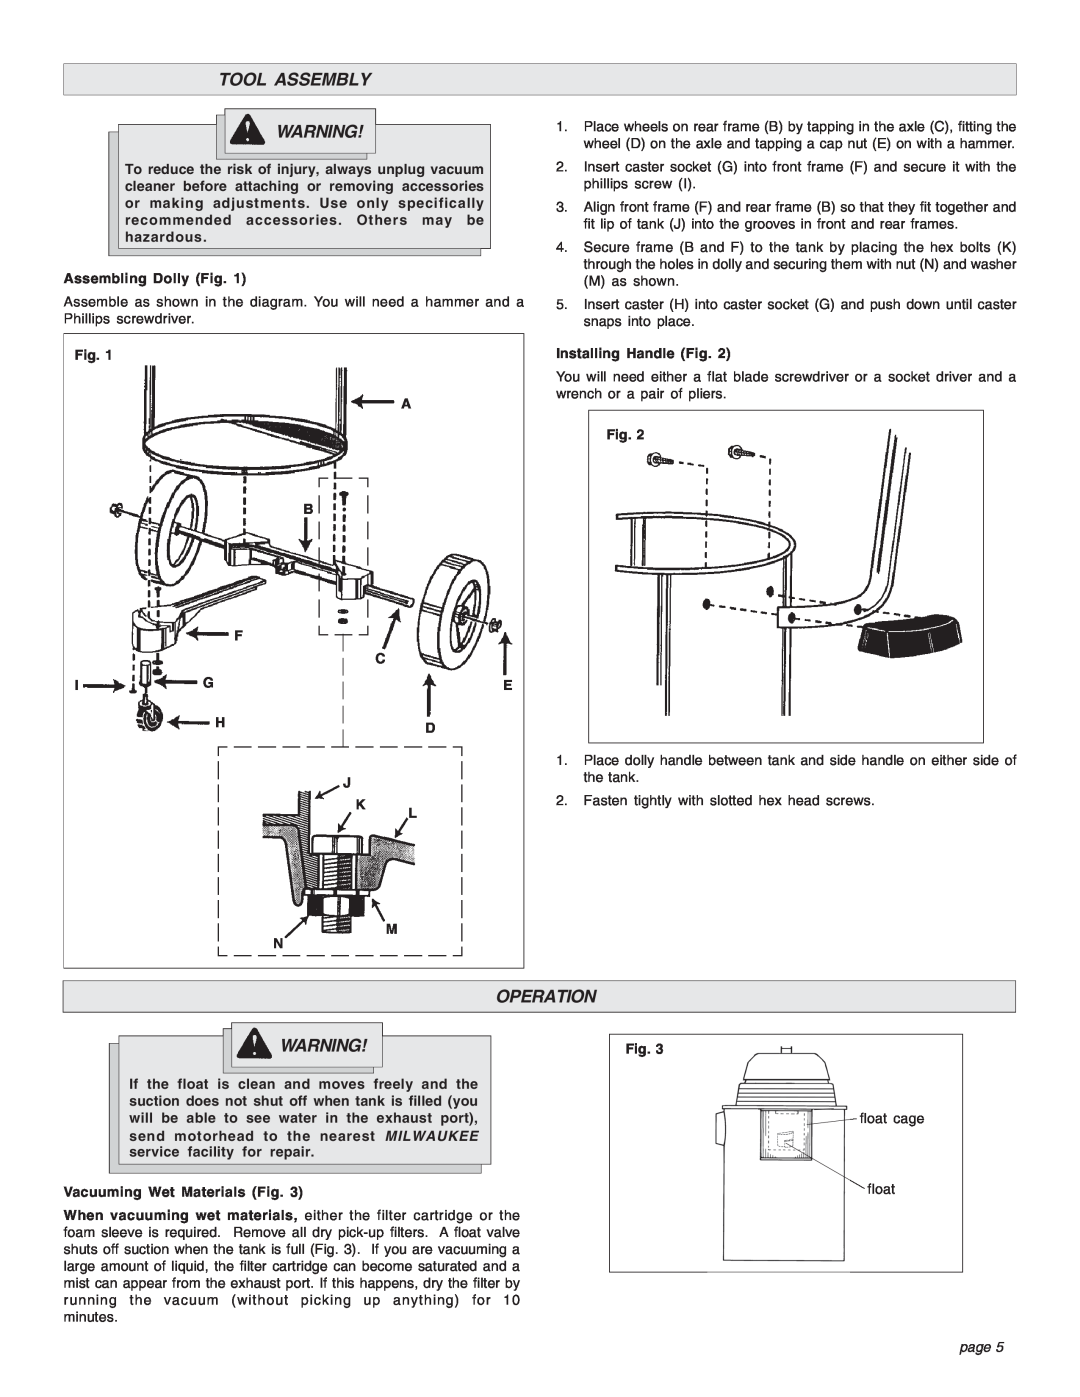 Intec 8940-20 manual Tool Assembly, Operation, page 